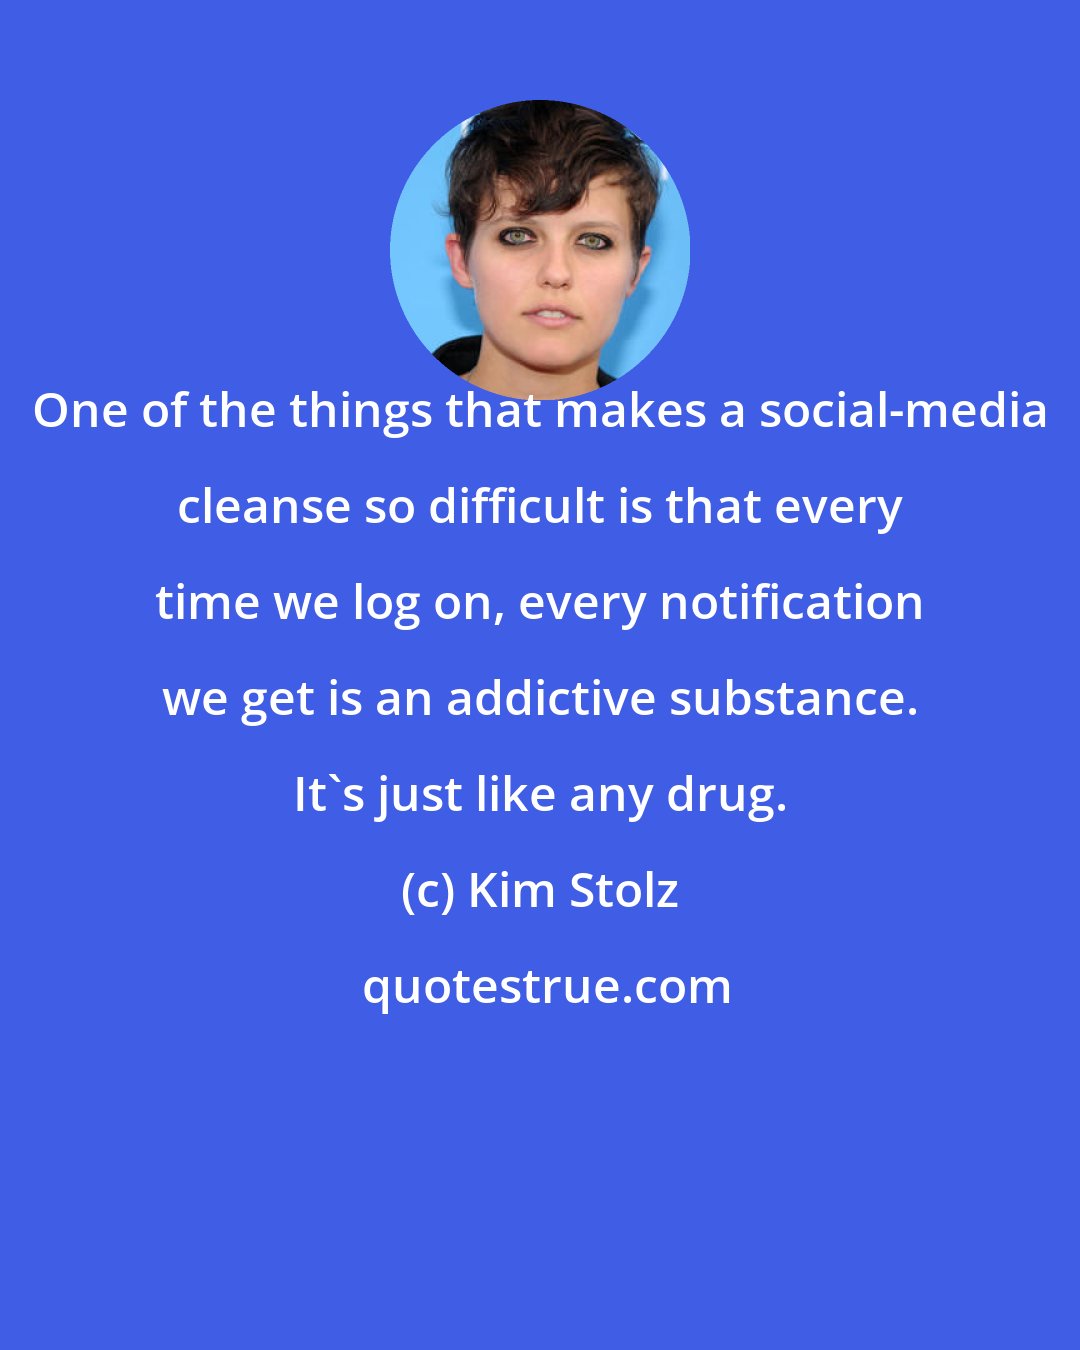 Kim Stolz: One of the things that makes a social-media cleanse so difficult is that every time we log on, every notification we get is an addictive substance. It's just like any drug.